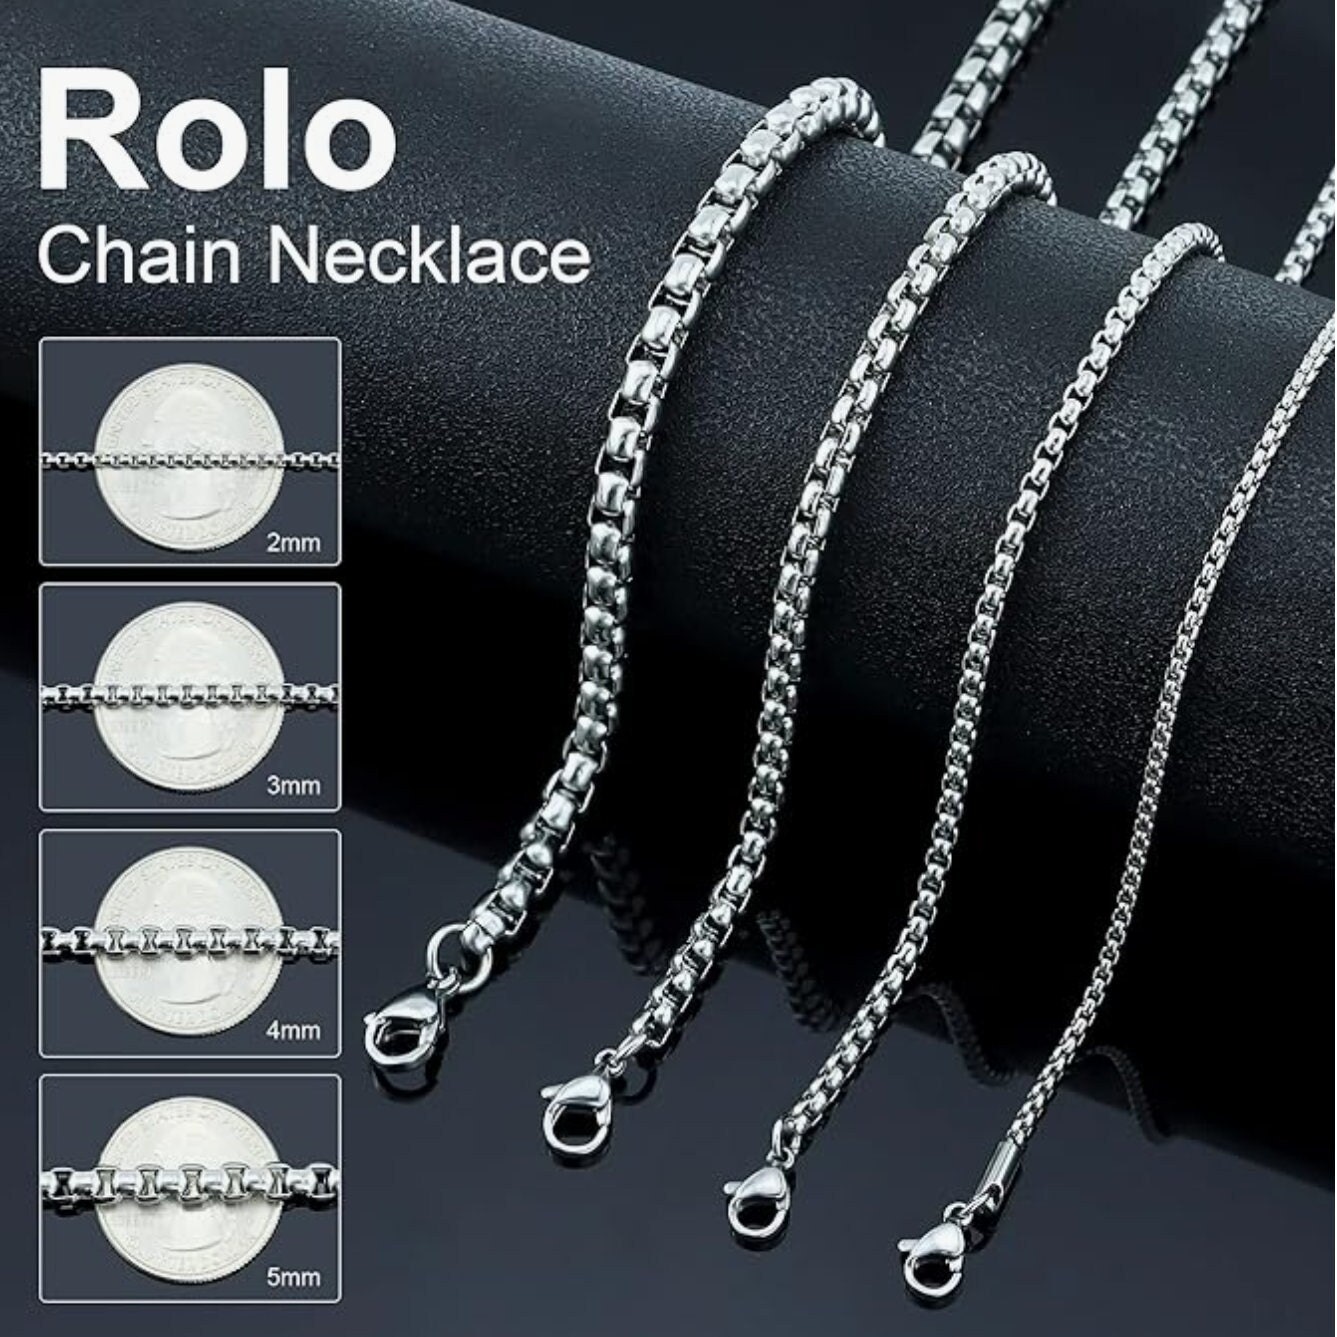 5 Meters/Lot Never Fade Thicken Stainless Steel Necklace Chains Bulk For  DIY Jewelry Findings Making Materials Handmade Supplies